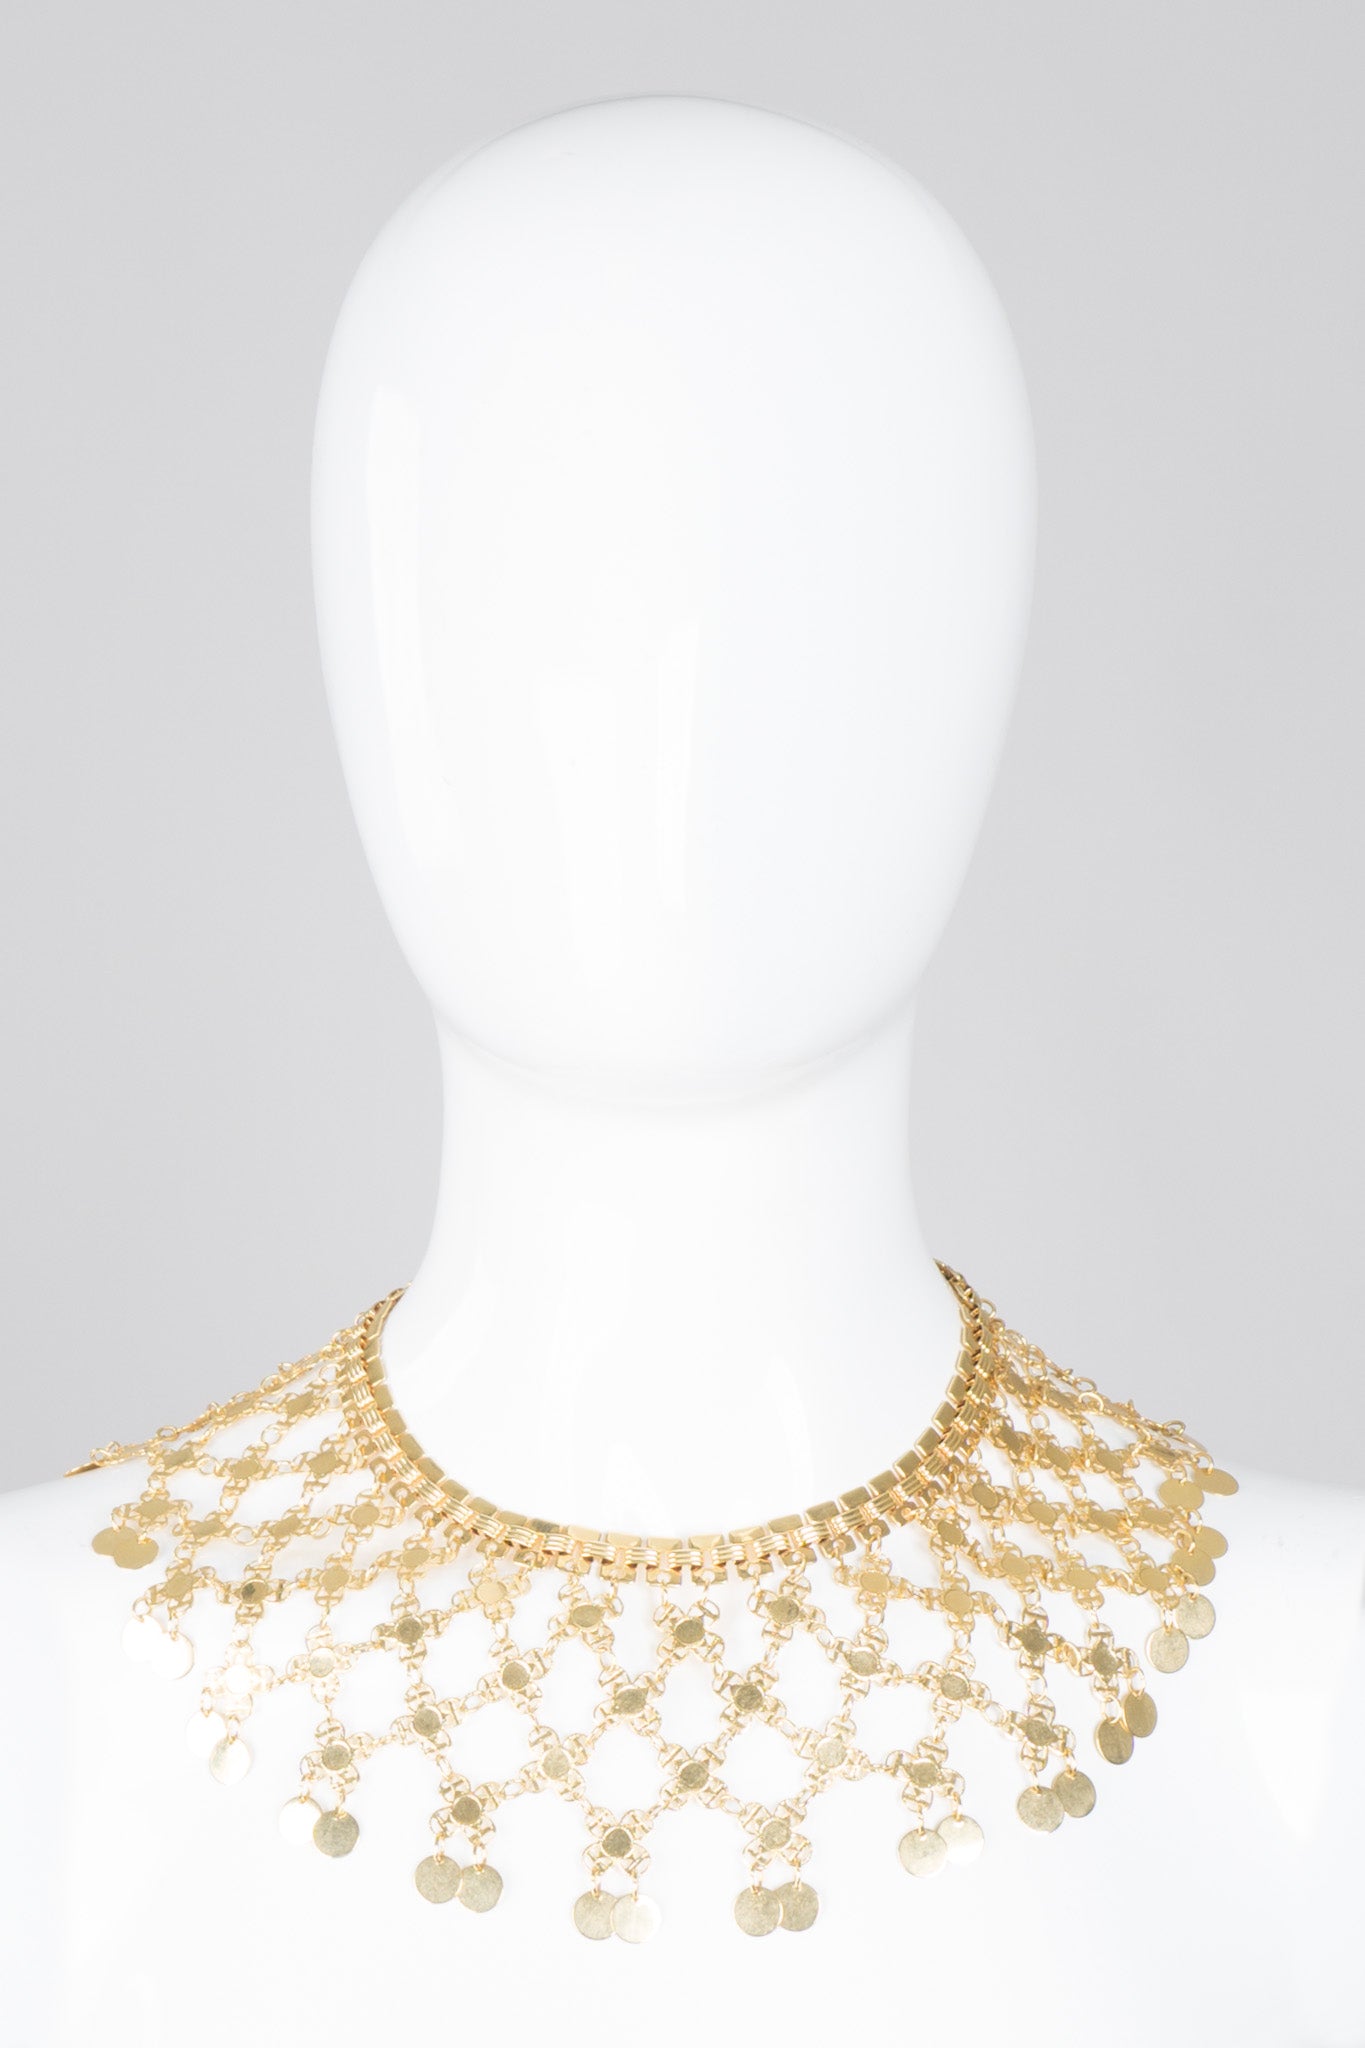 Vintage 60s Lattice Mesh Necklace and Earring Set